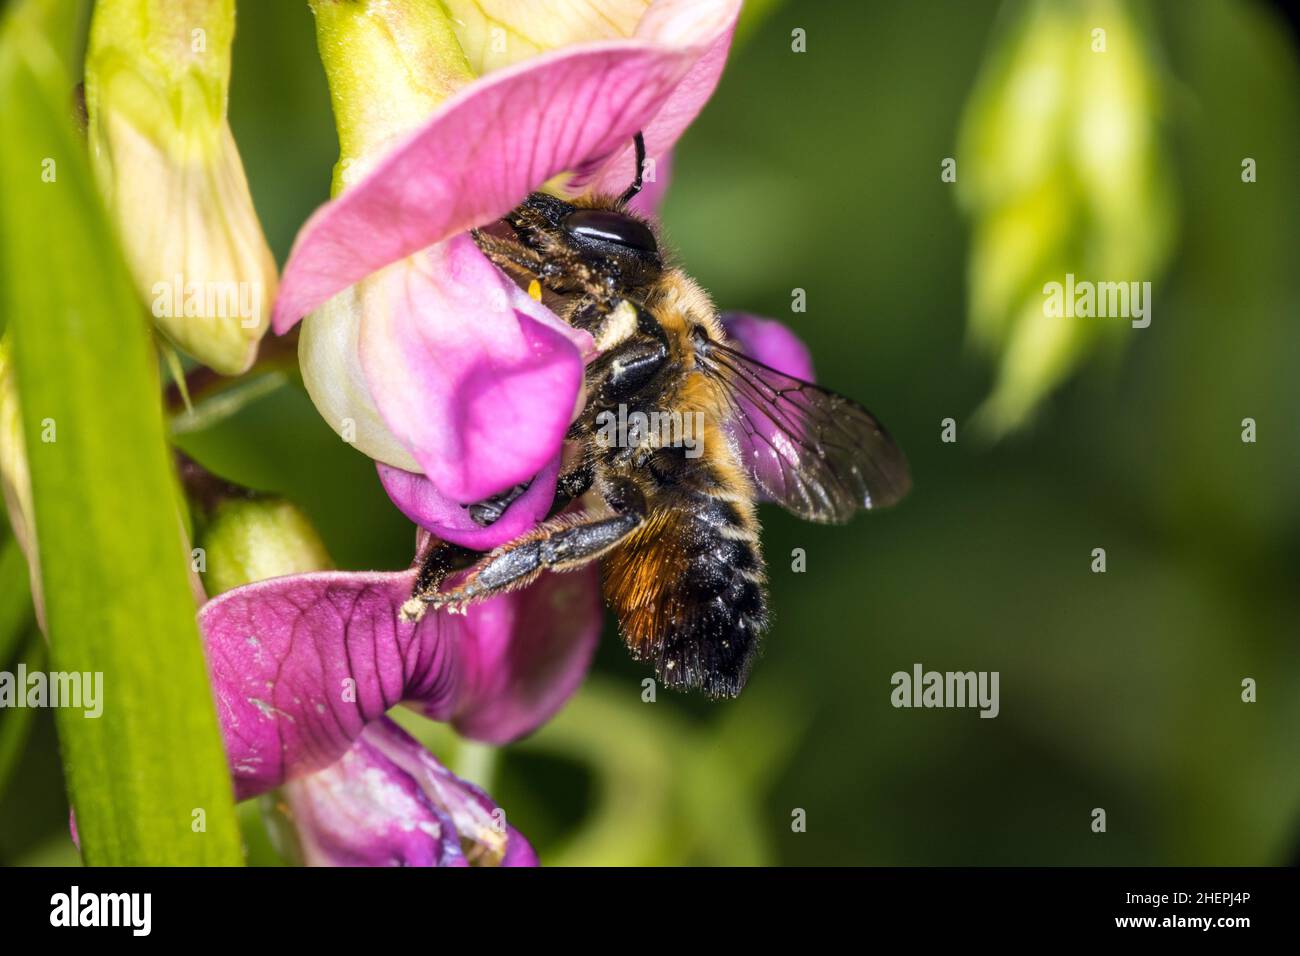 Leafcutter bee, Leafcutter-bee (Megachile ericetorum, Chalicodoma ericetorum, Pseudomegachile ericetorum), sucking nectar at vetchling, Lathyrus, Stock Photo